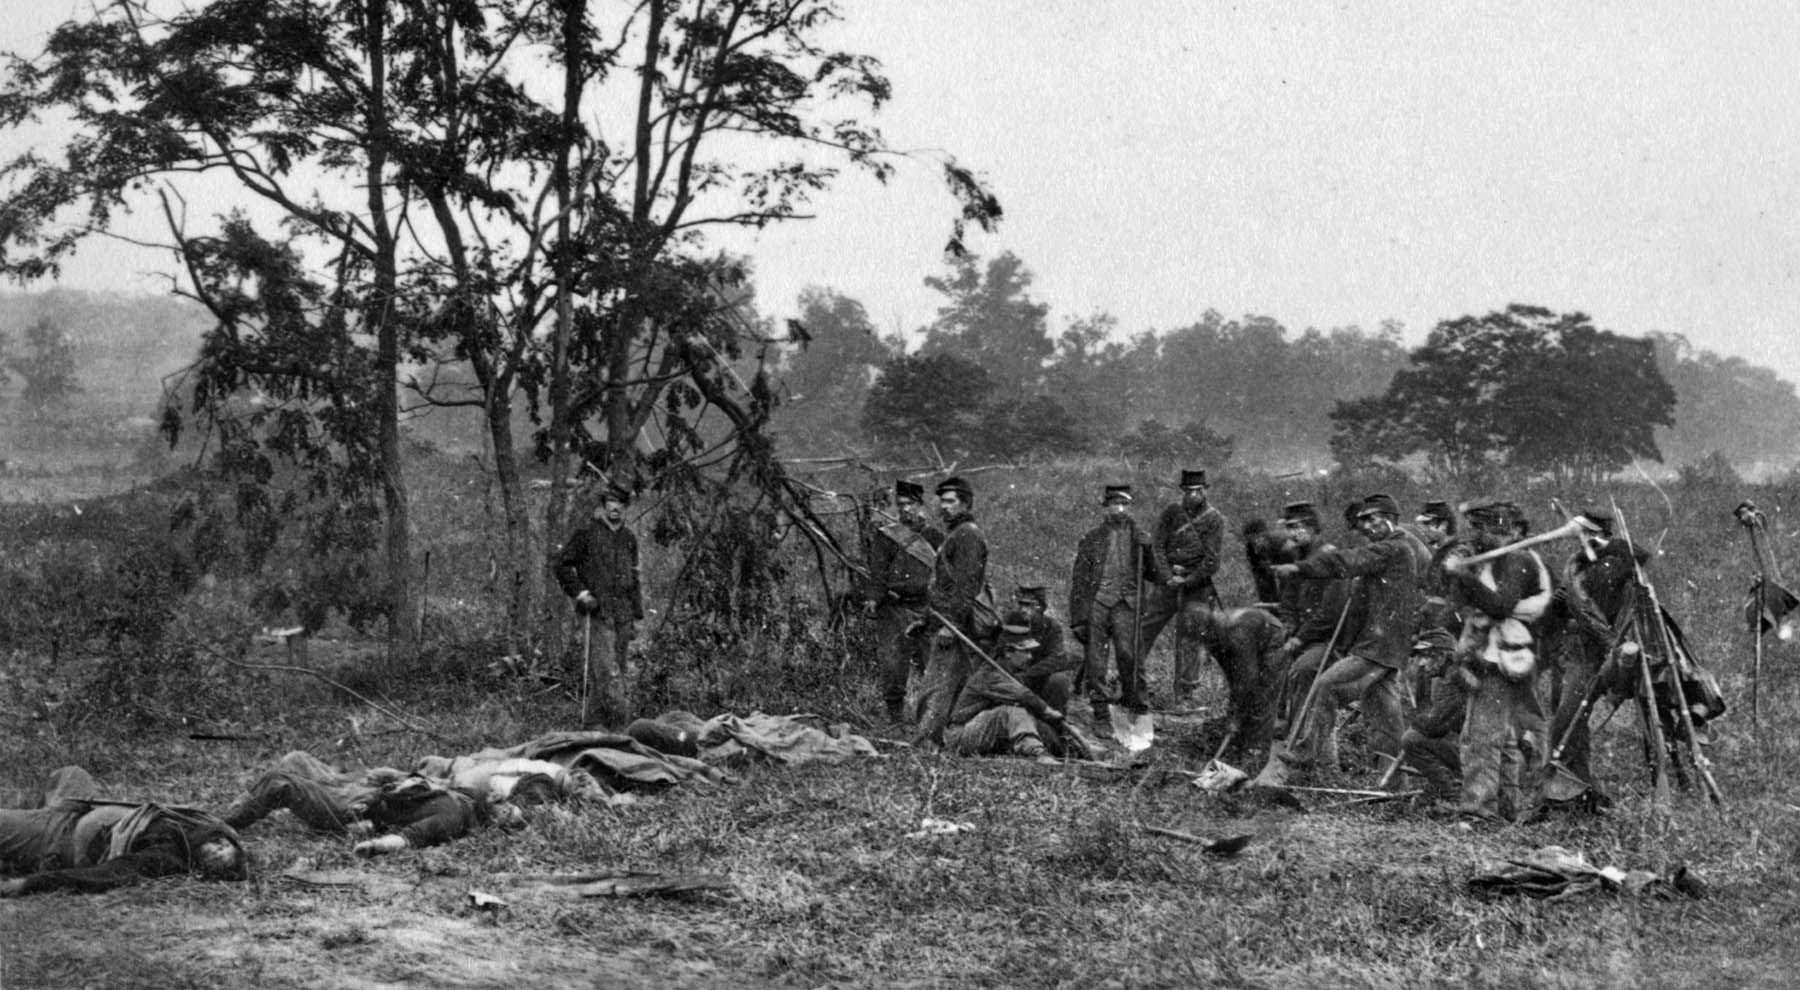 An exhausted Union burial detail takes a break from its melancholy work on the Miller Farm at Antietam. Dead Confederates awaiting interment lie scattered before them.